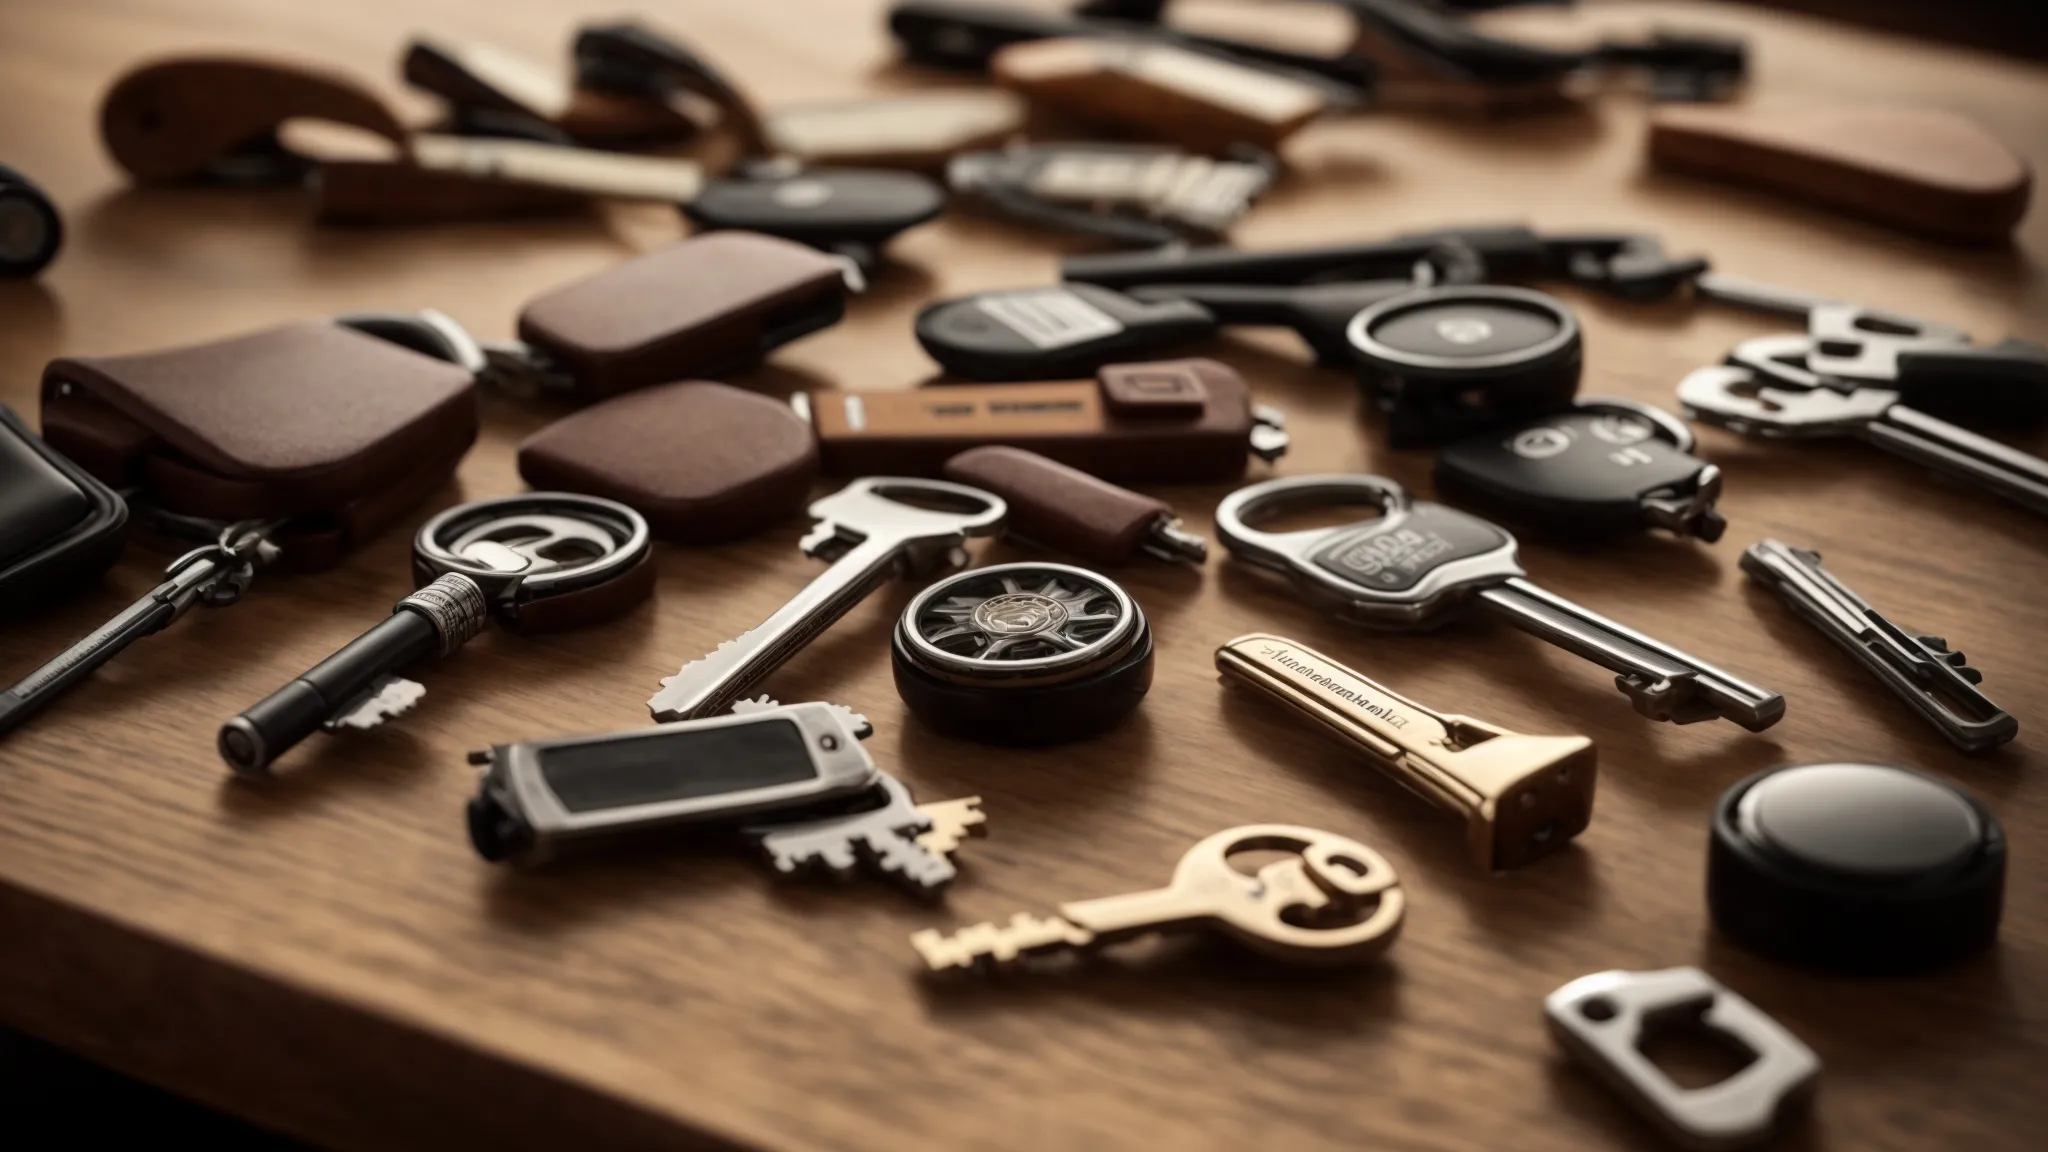 A Collection Of Diverse Keys Lying On A Wooden Table, Each With A Different Design.